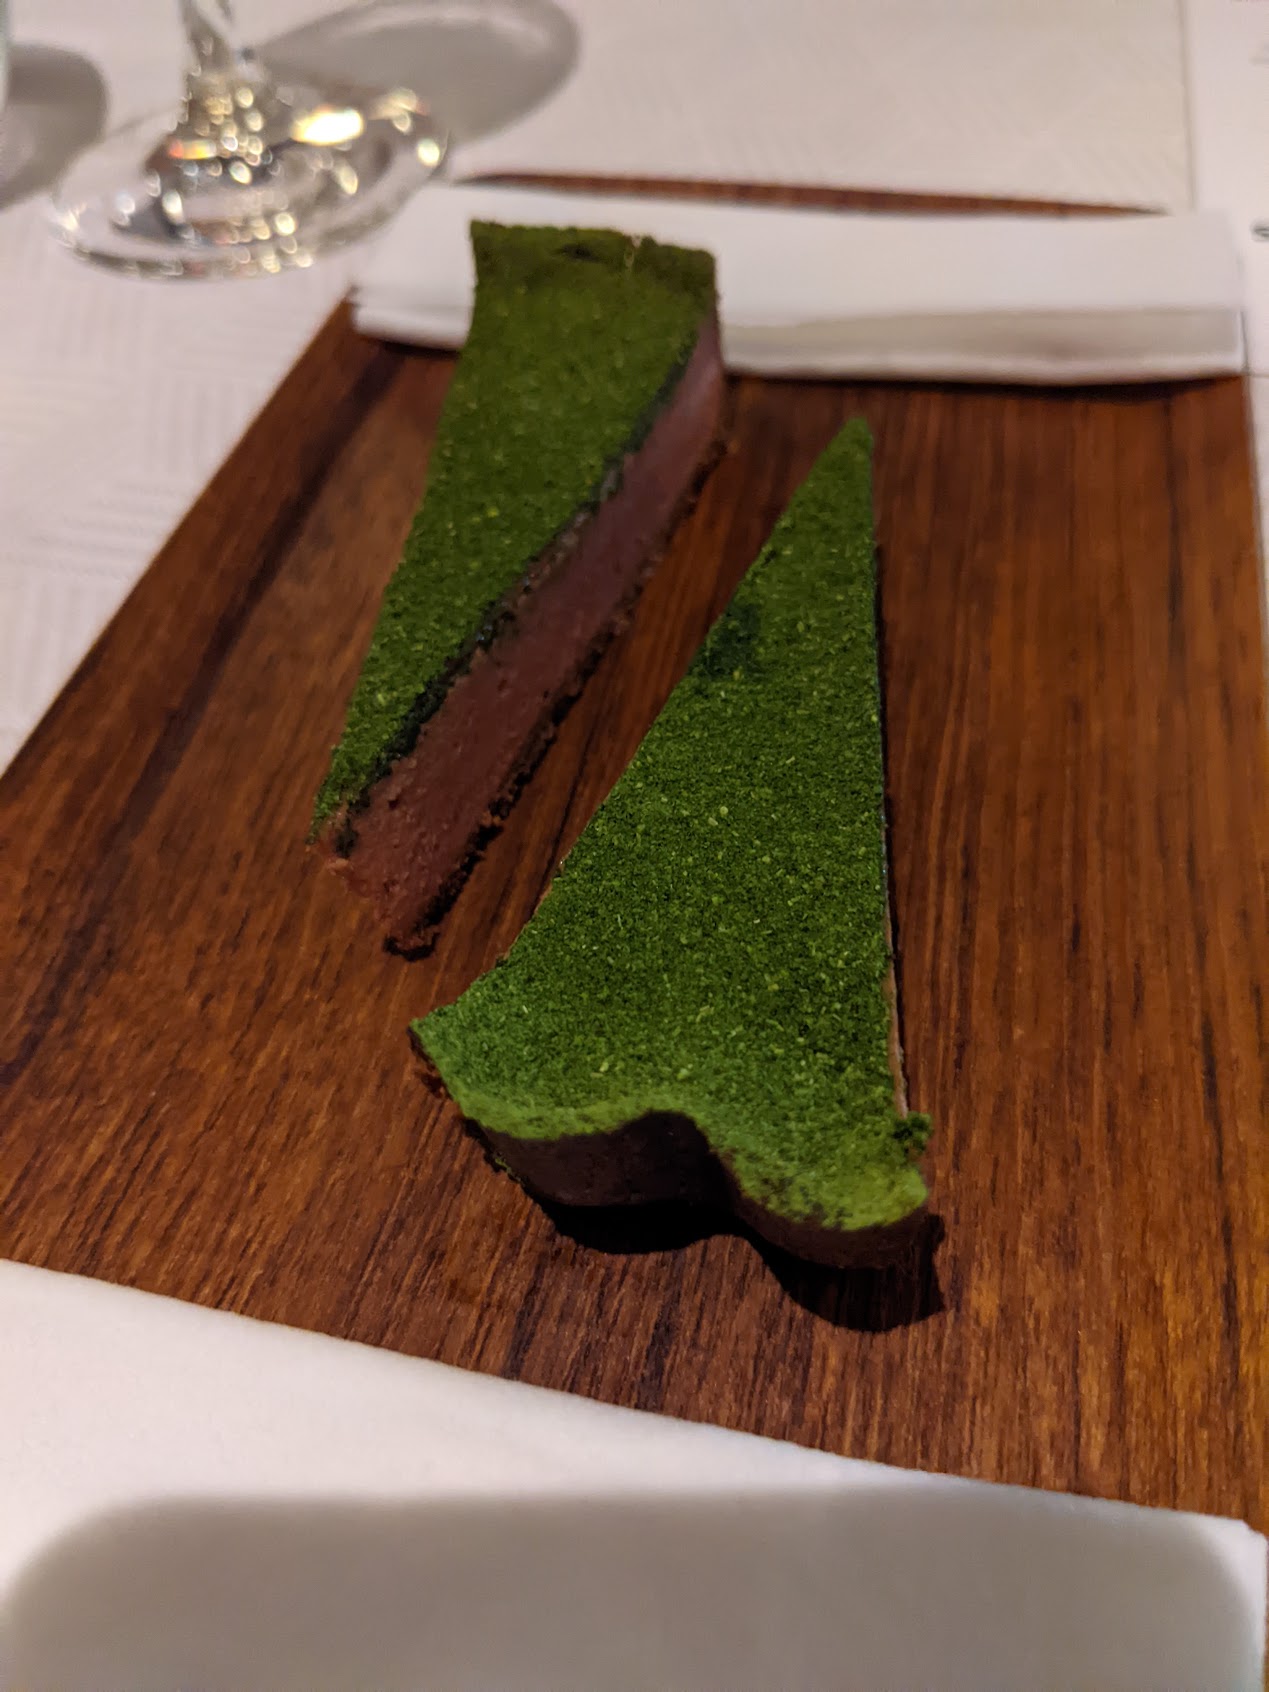 a piece of cake with green powder on top